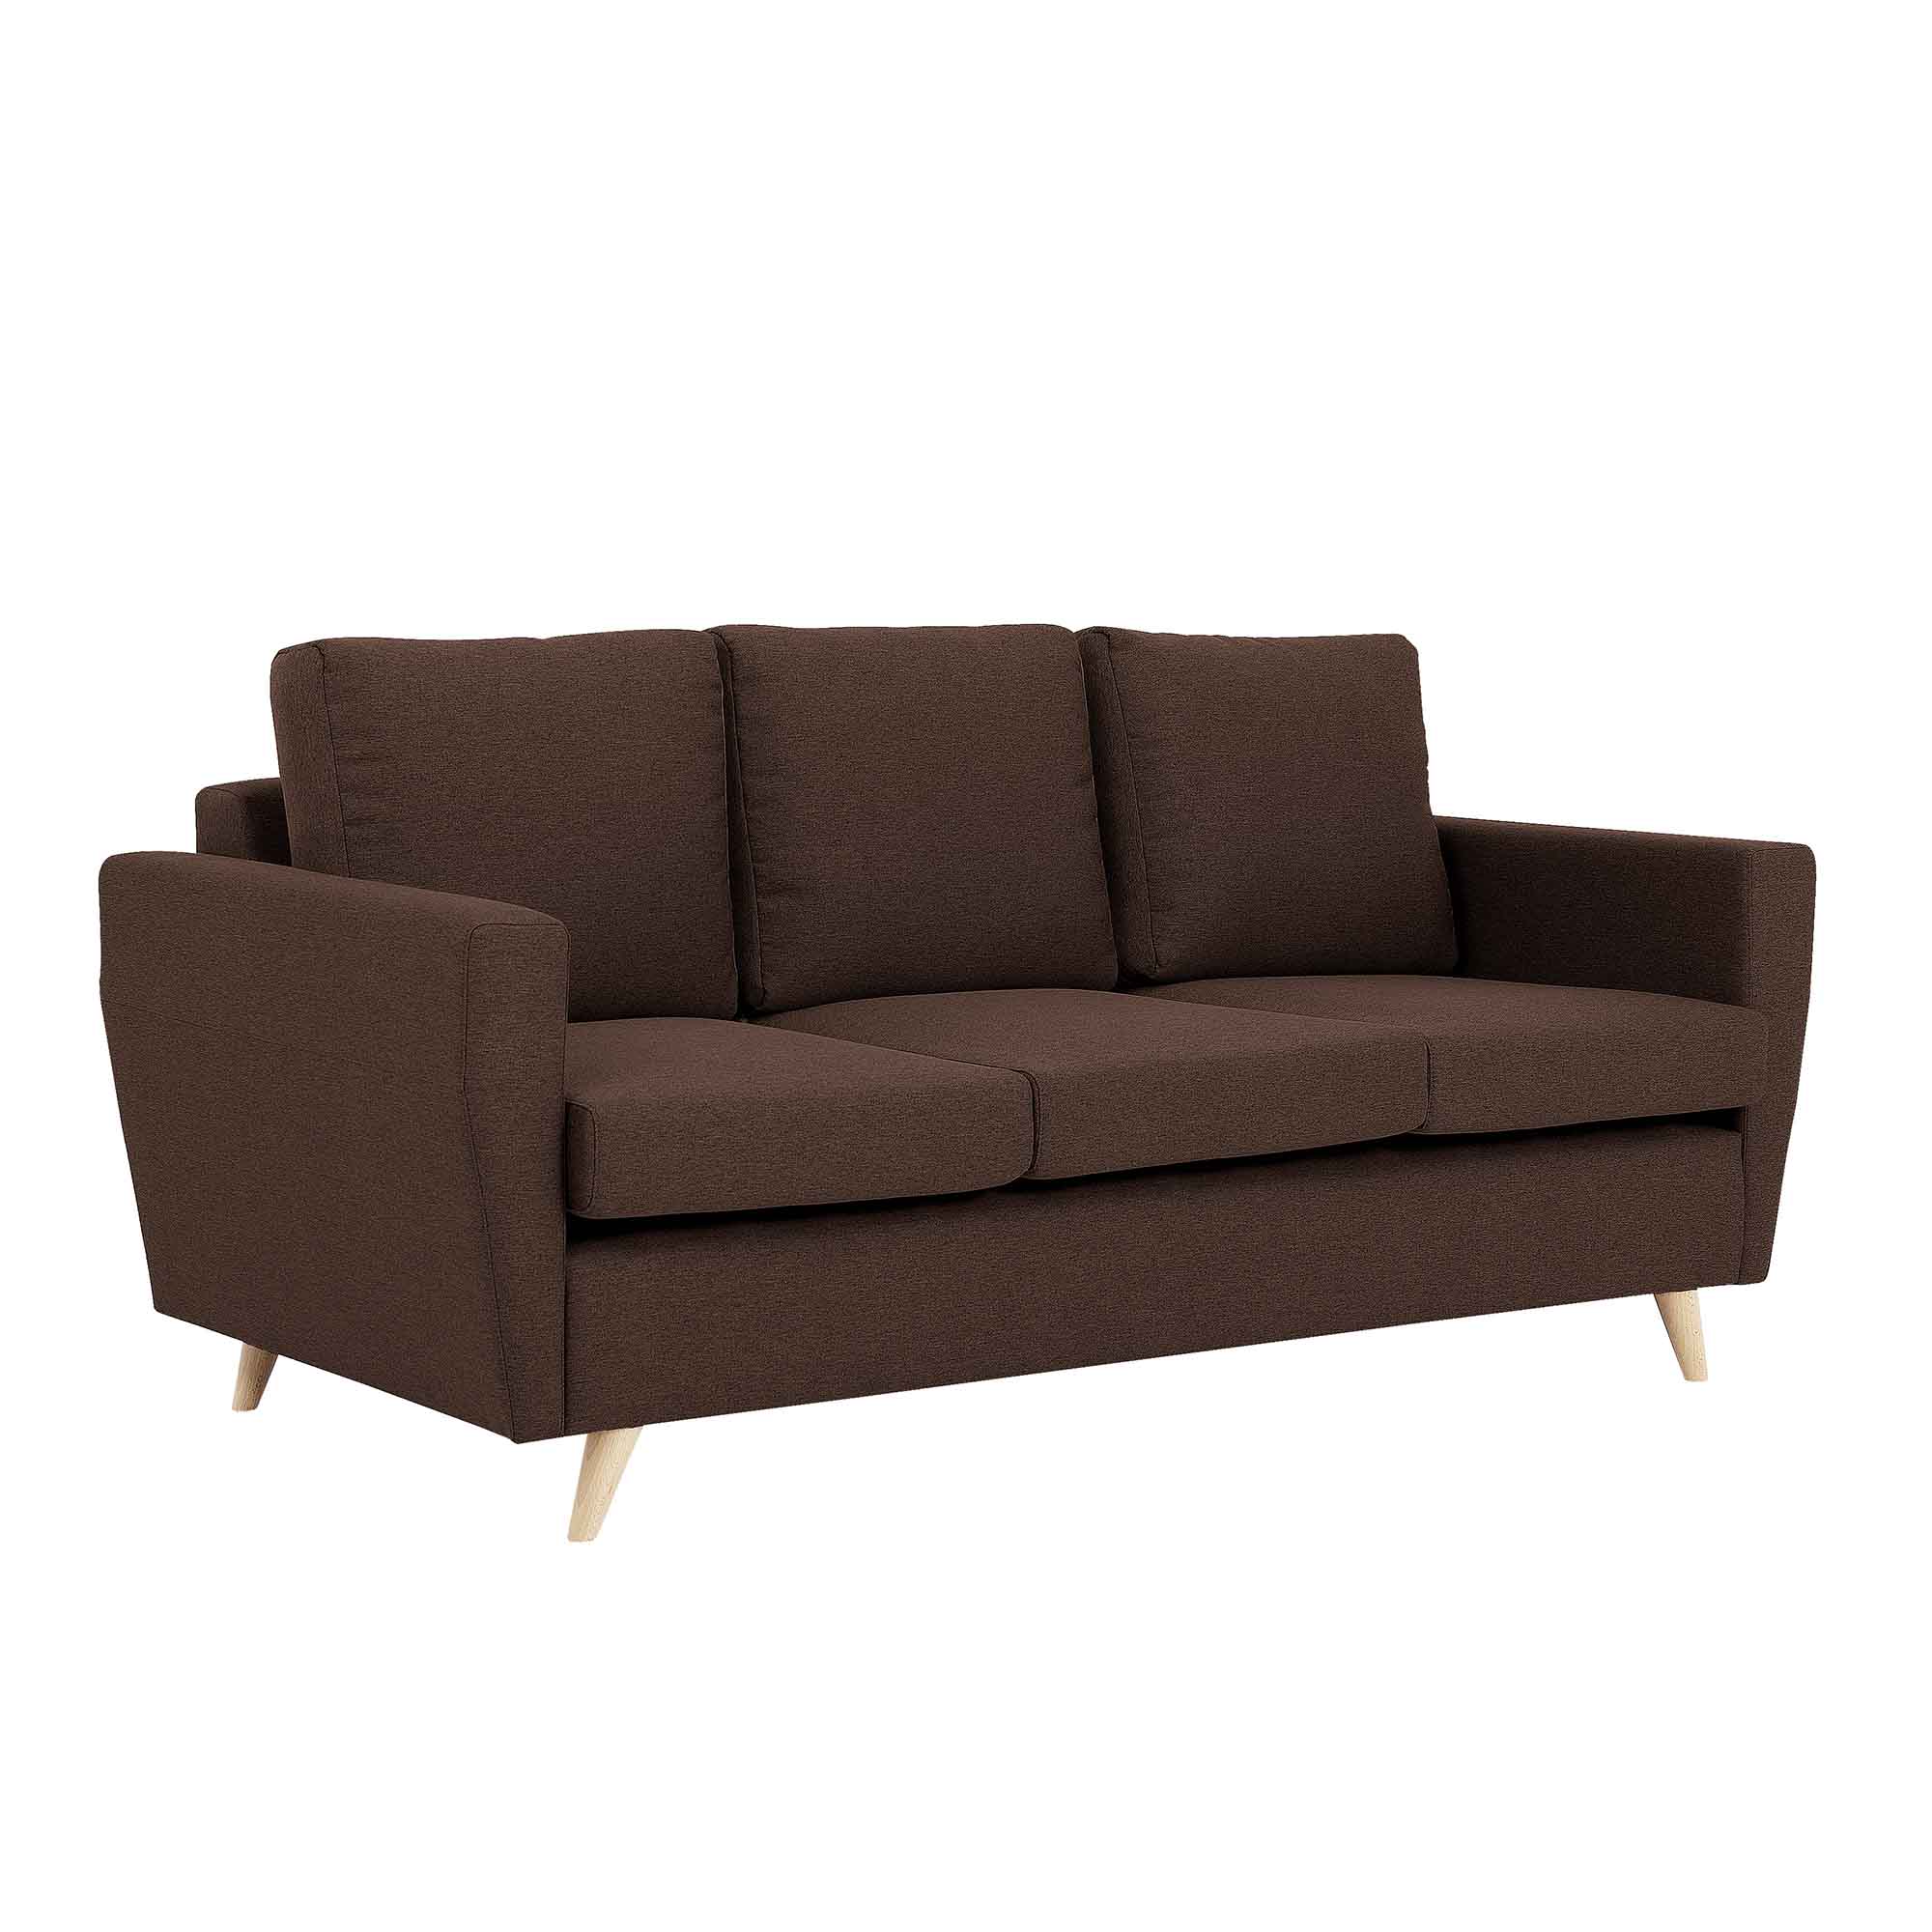 LOVER Sofa 3 Seater